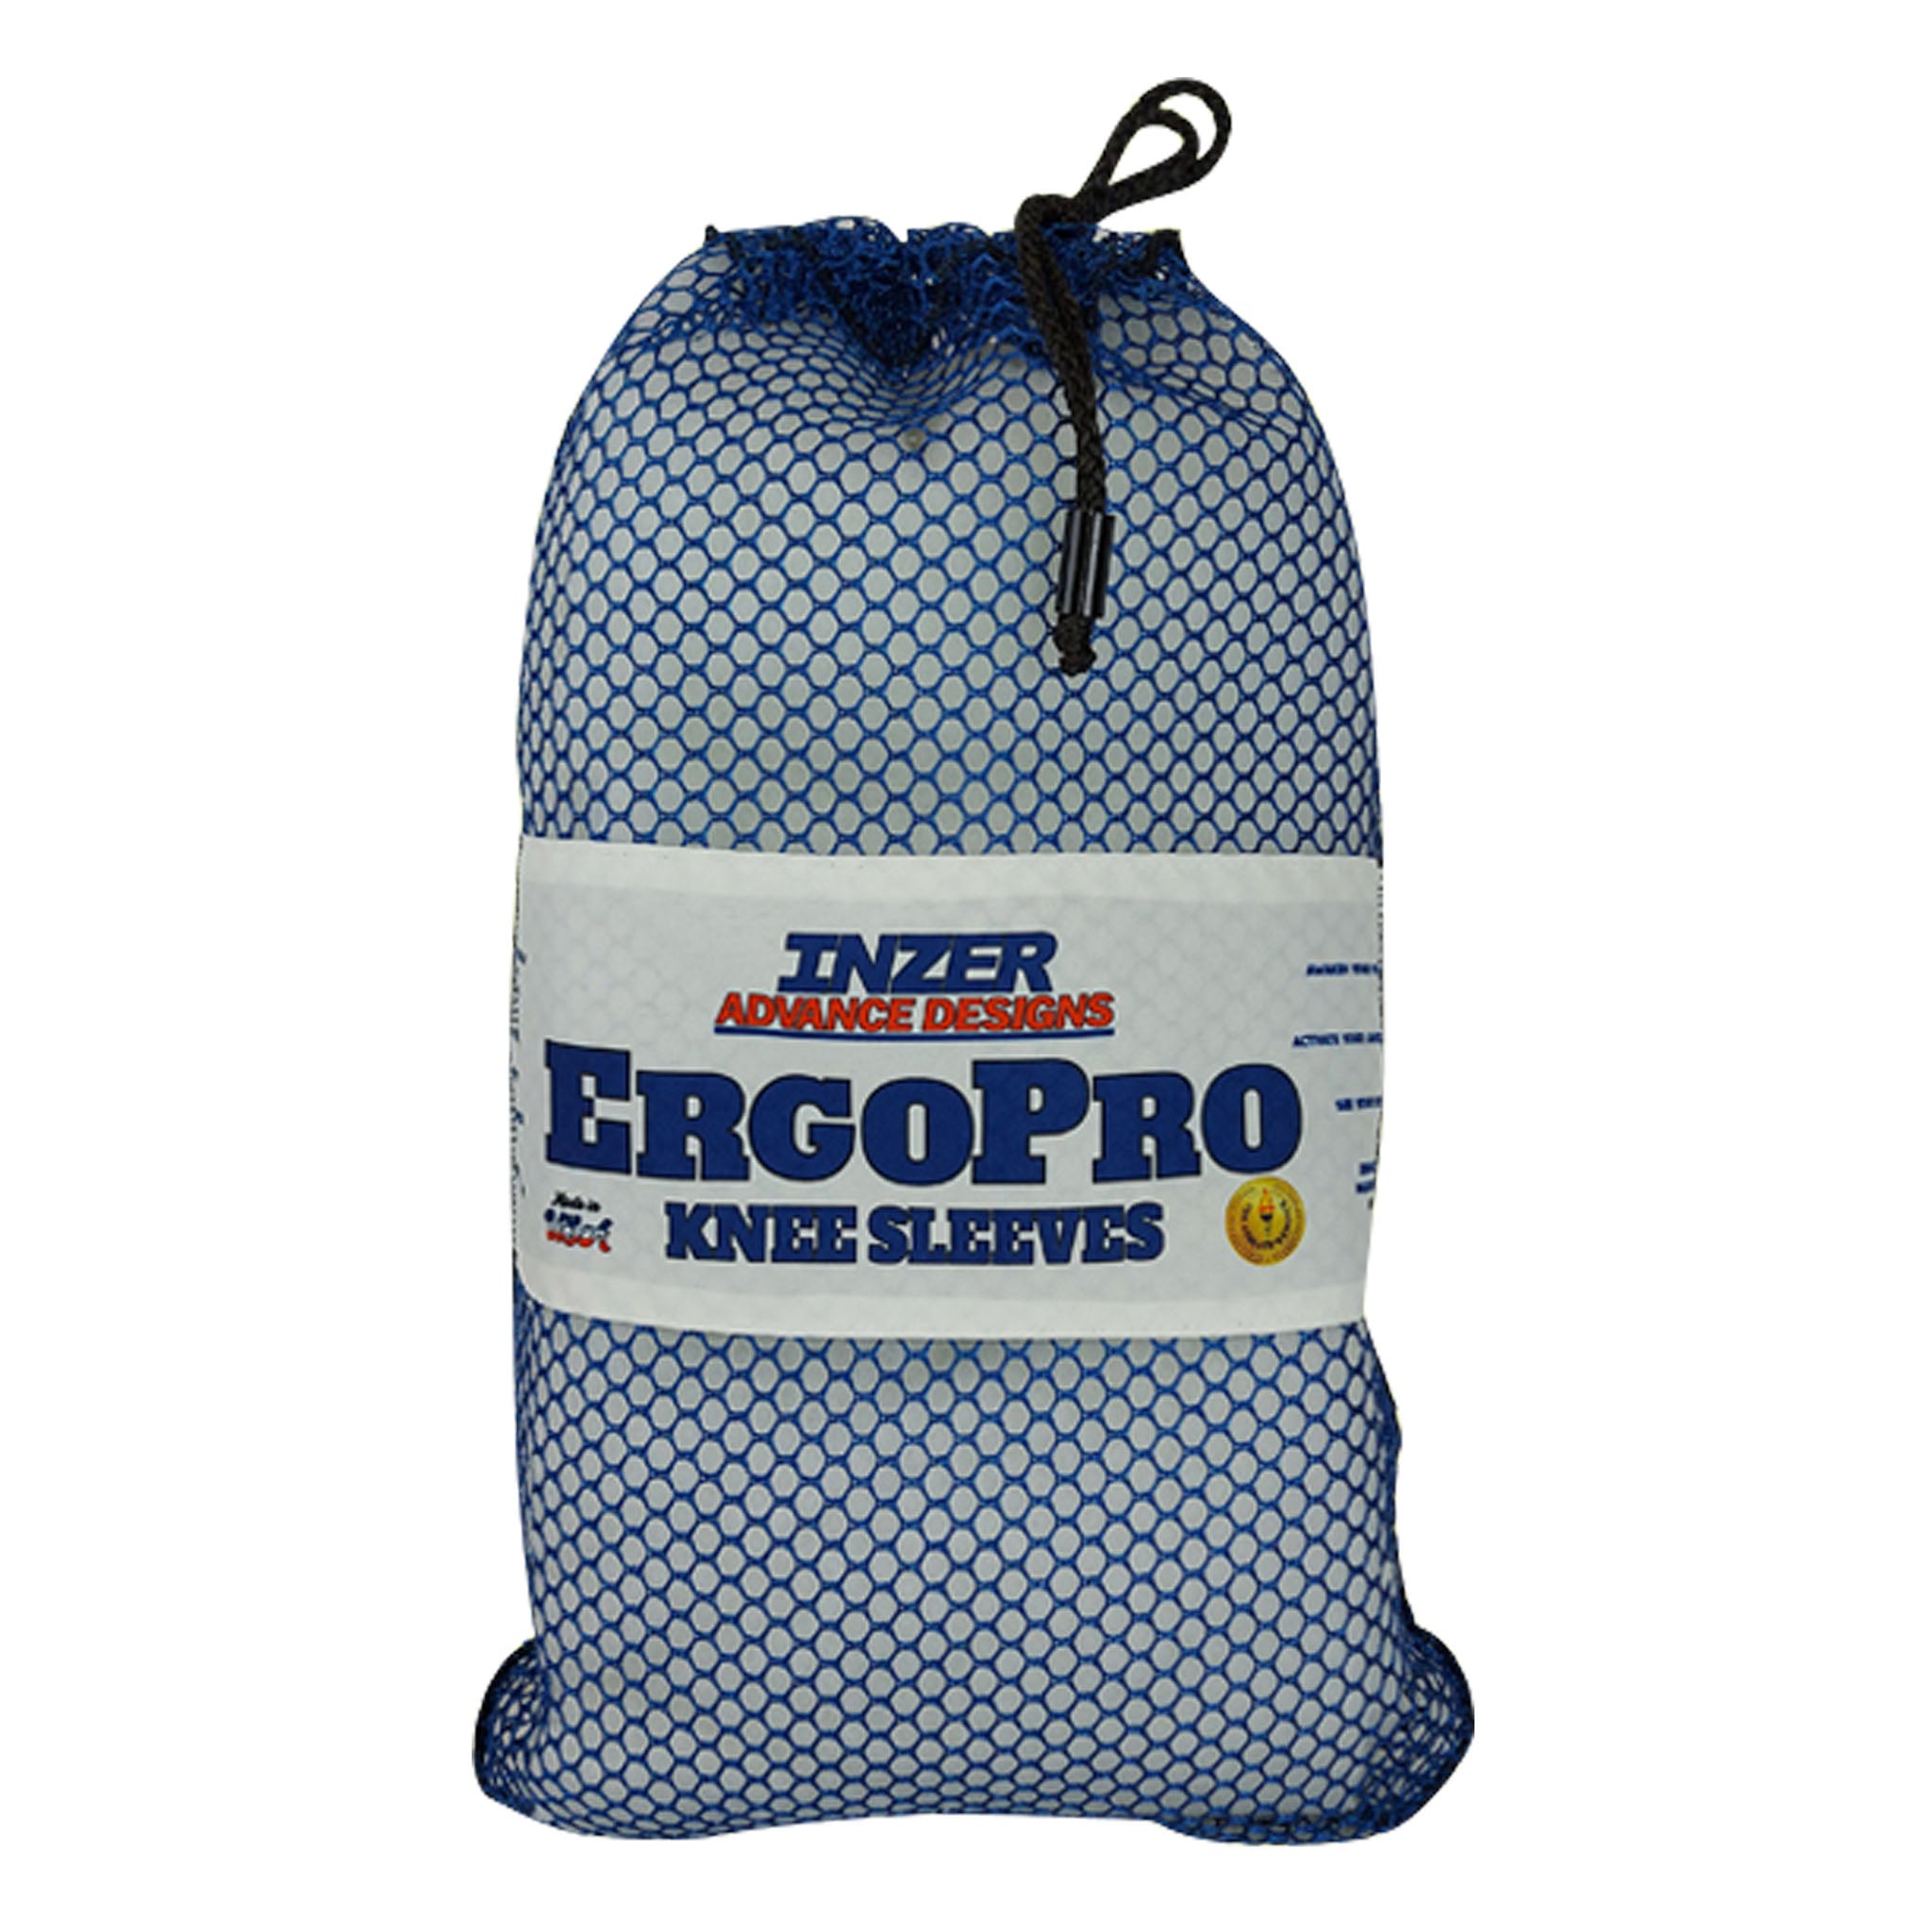 Shop Custom and Standard Laundry Bags Online 